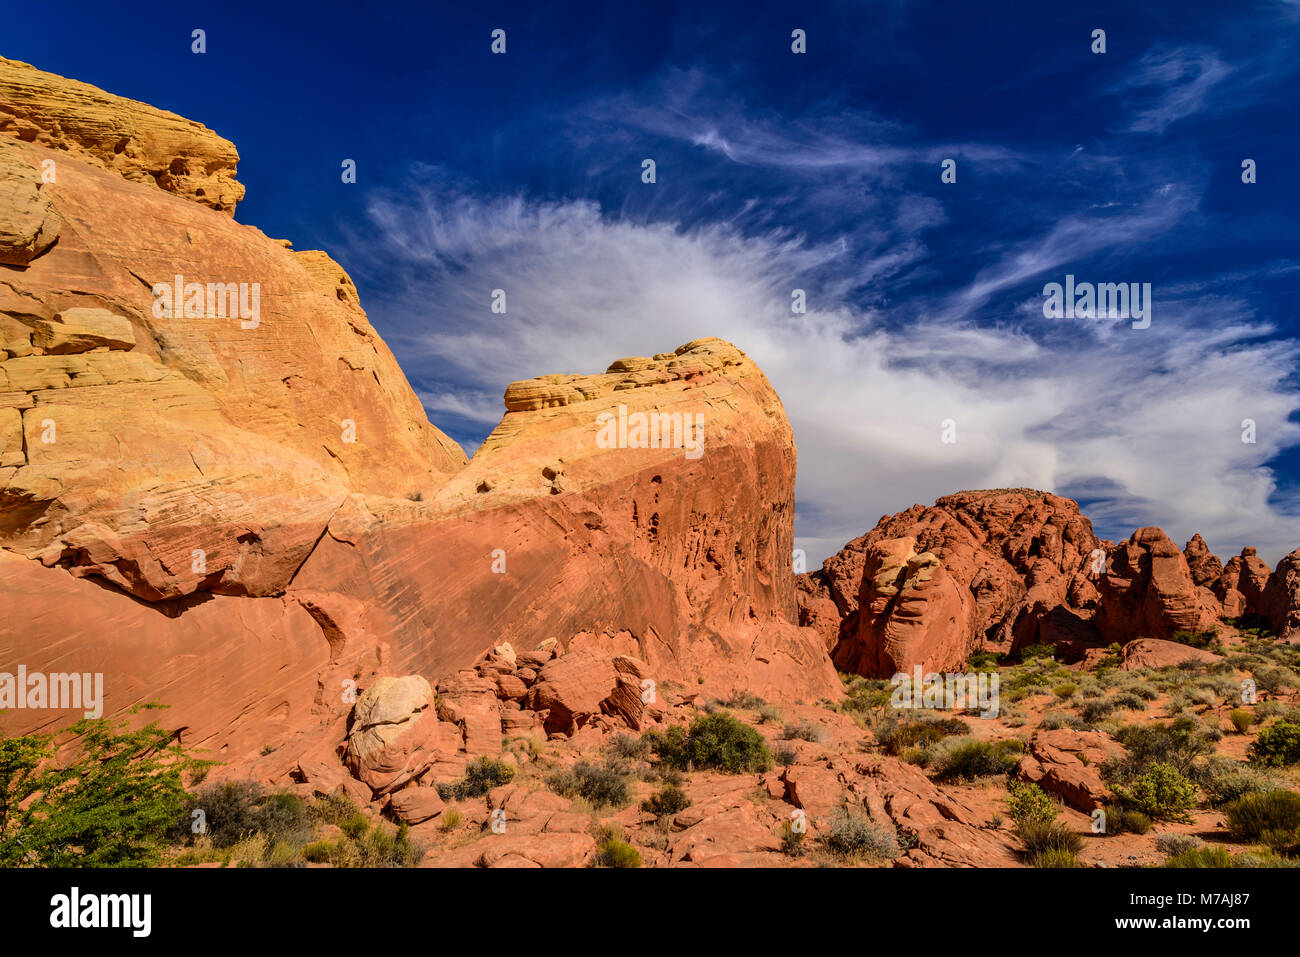 The USA, Nevada, Clark County, Overton, Valley of Fire State Park, rock formations close Rainbow Vista Stock Photo